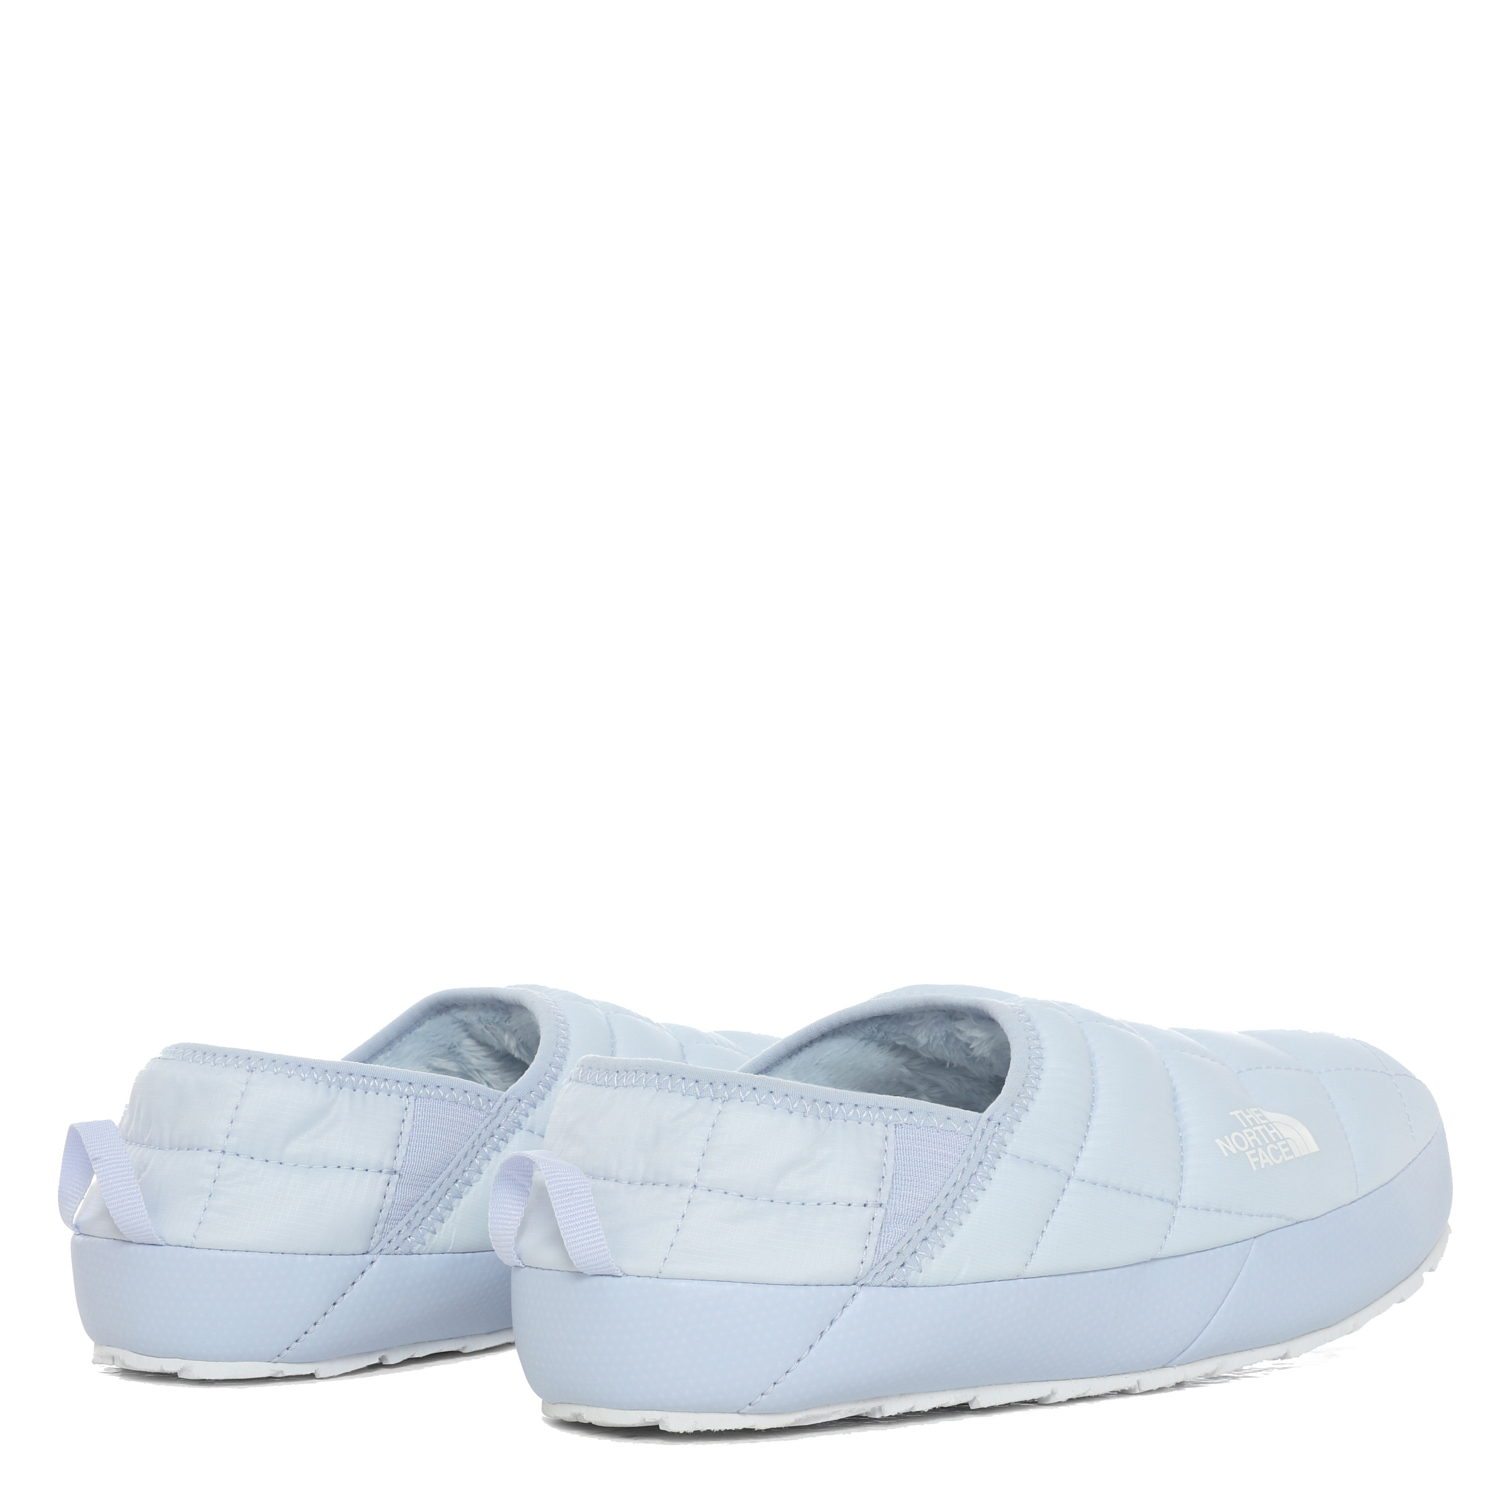 Тапки The North Face Thermoball Traction Mule V Mist Blue/Tnf White